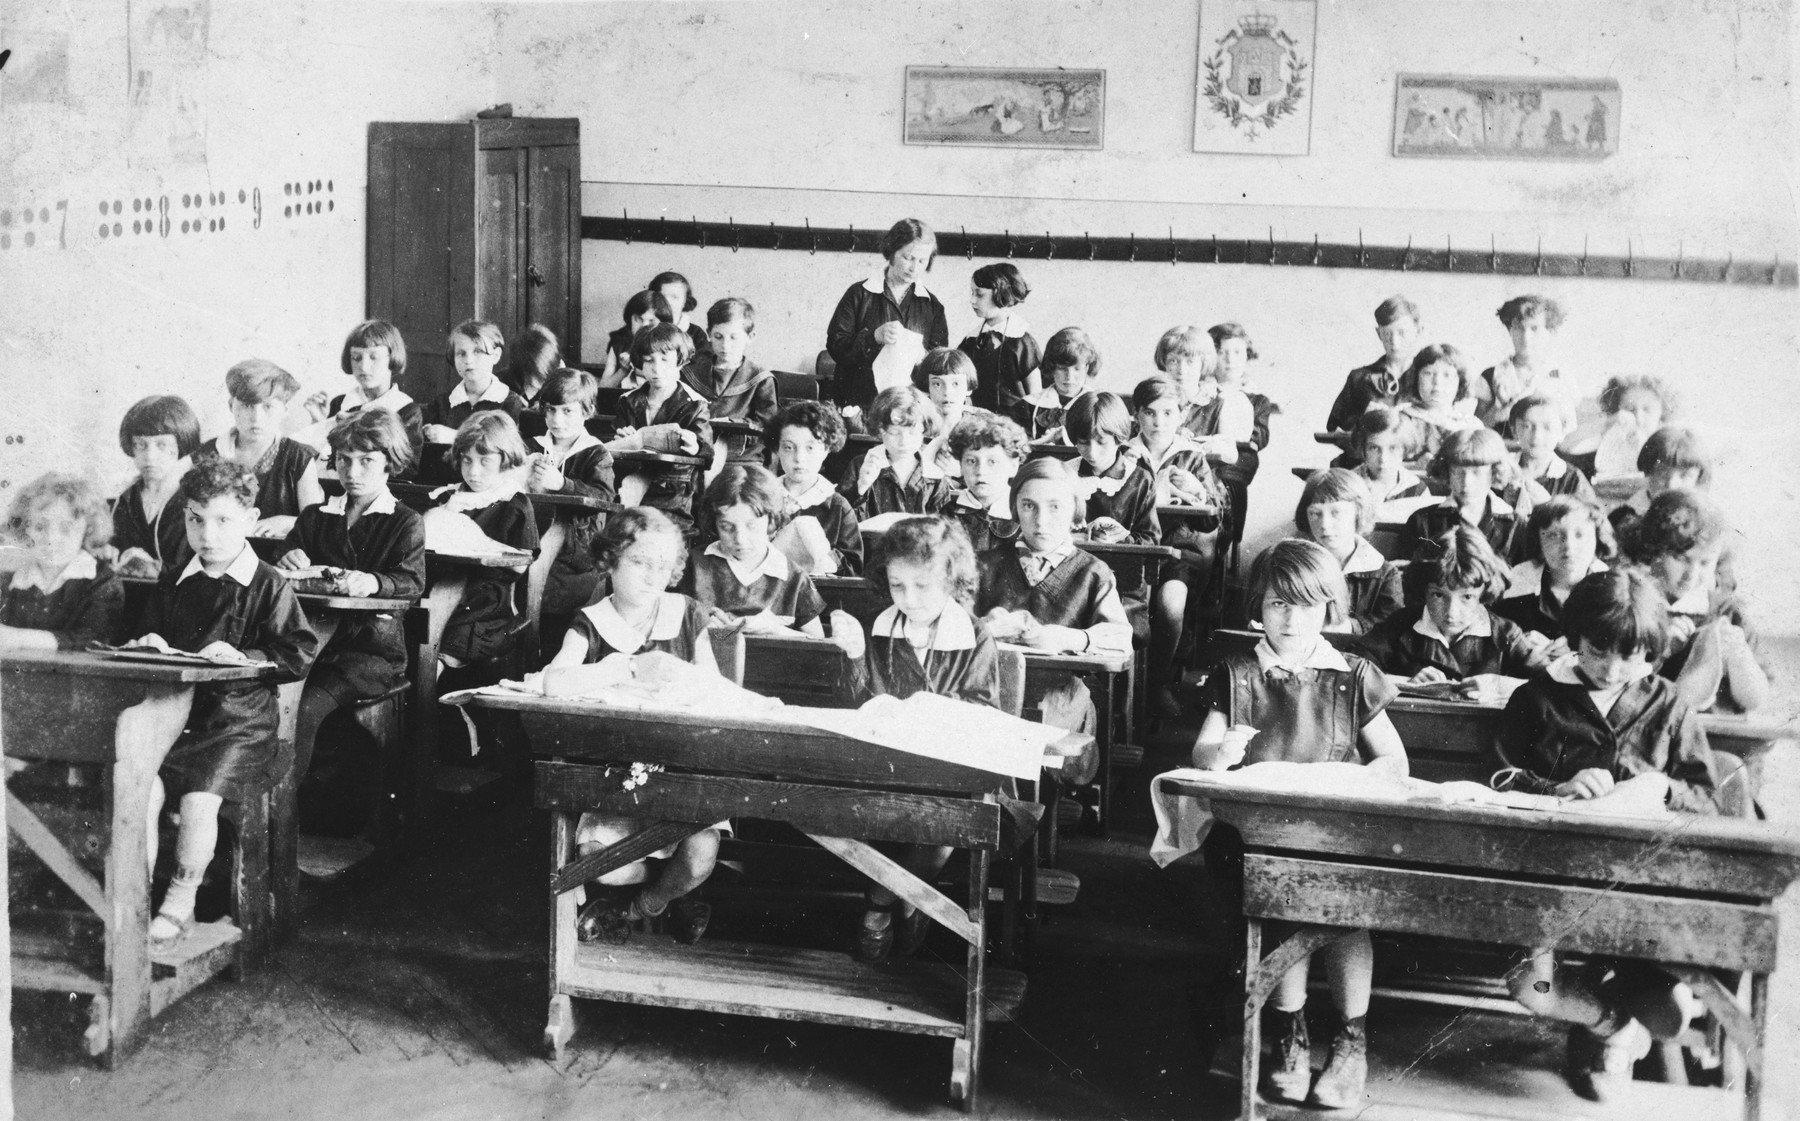 Pupils sit at their desks in a classroom at a public school on Zamarstynowska Street in Lvov.  The school, which was located in a Jewish neighborhood, was populated almost entirely by Jews.

Among those pictured is Tamara Abramowicz (lower left).